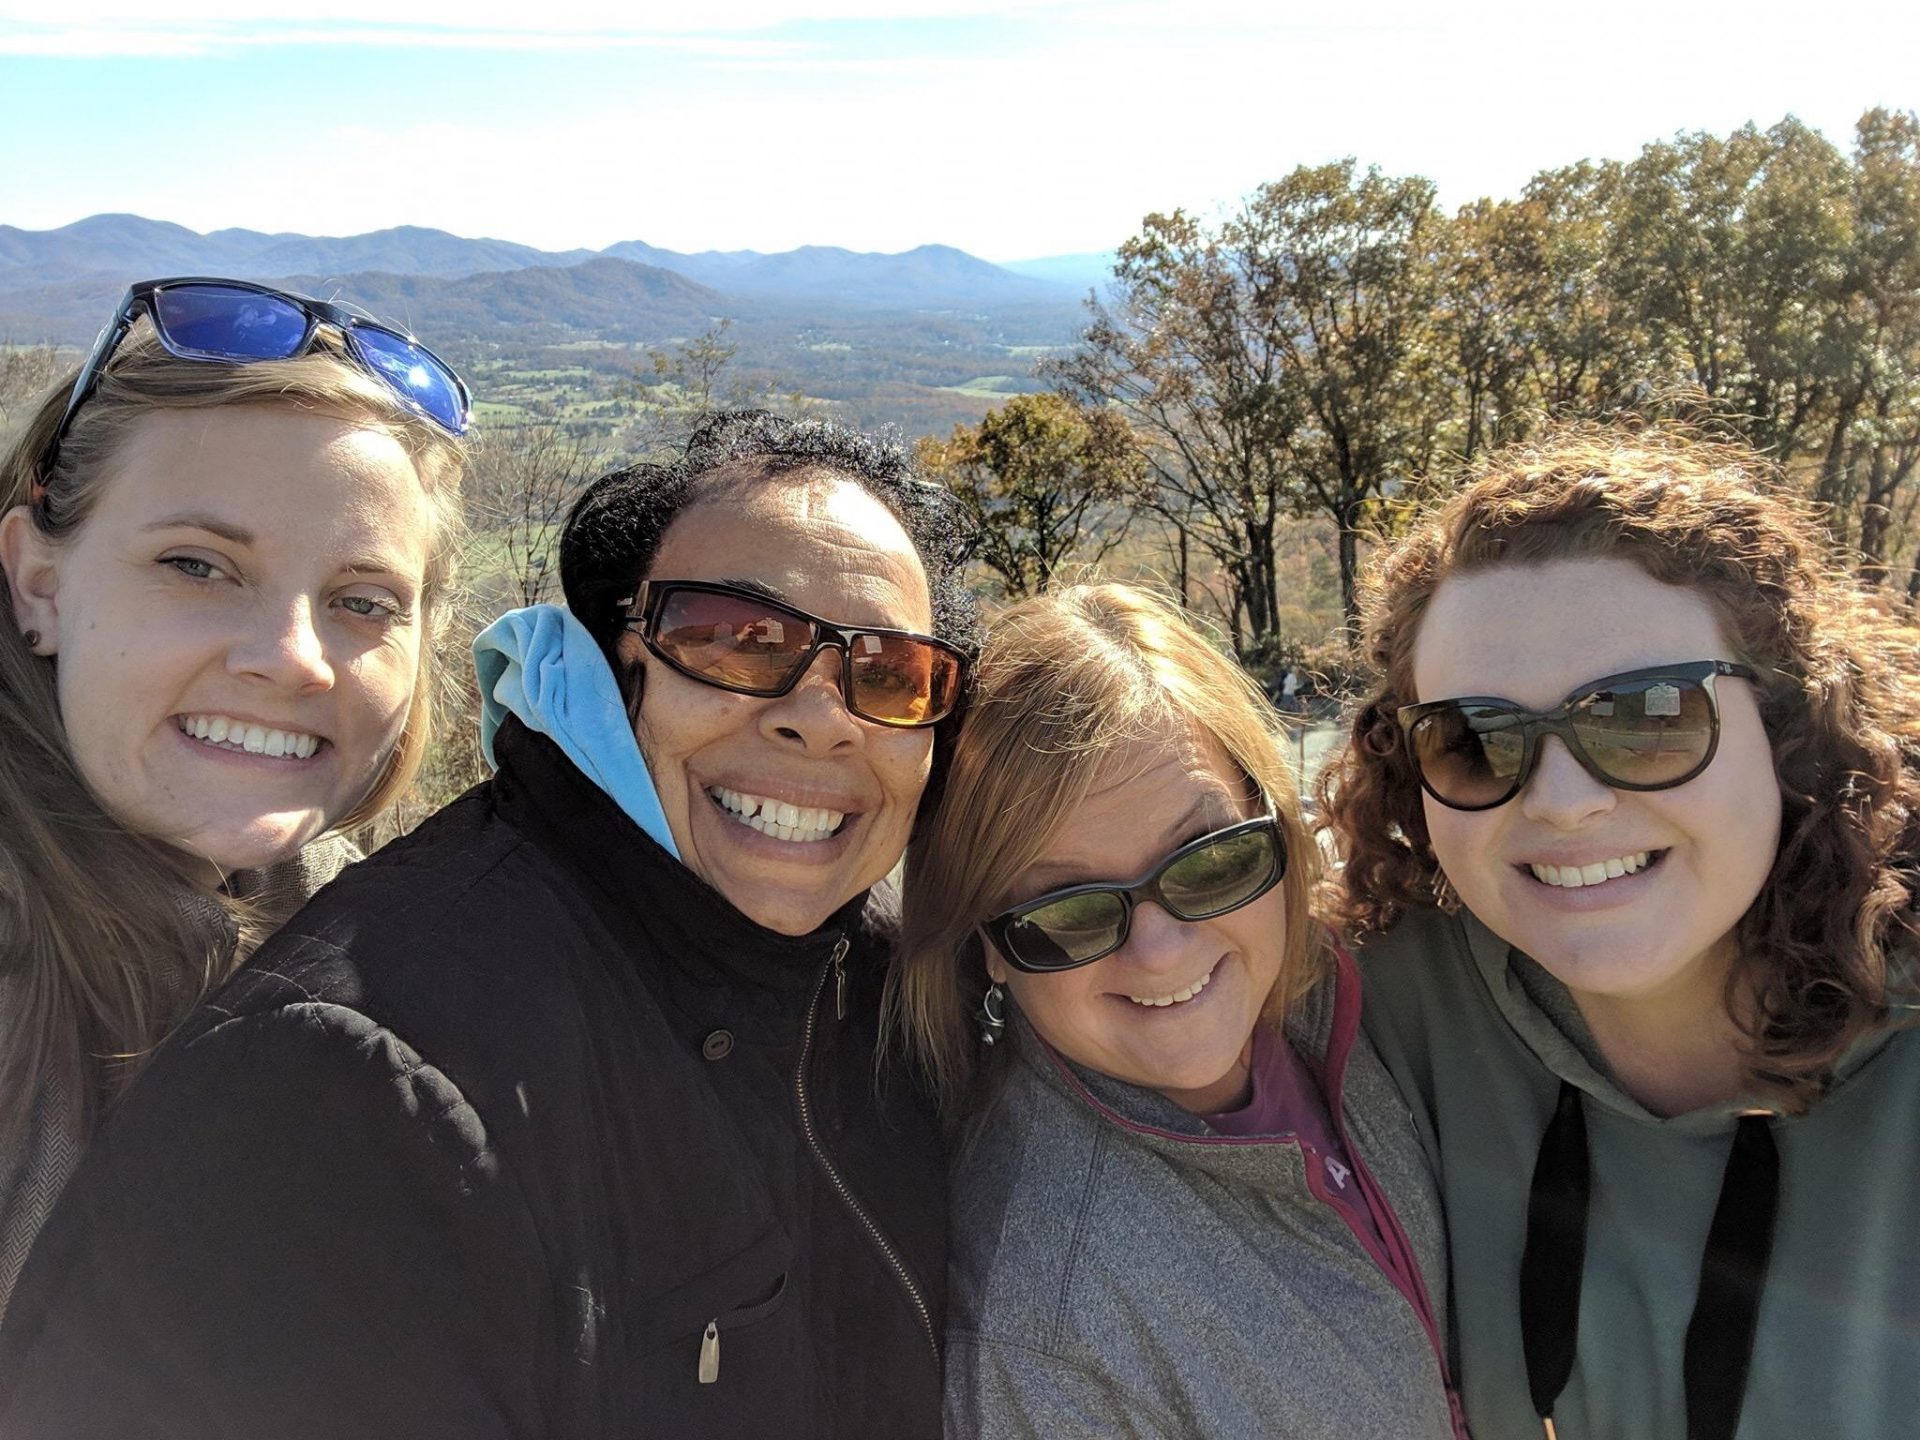 Four women posing for a selfie on top of a mountain